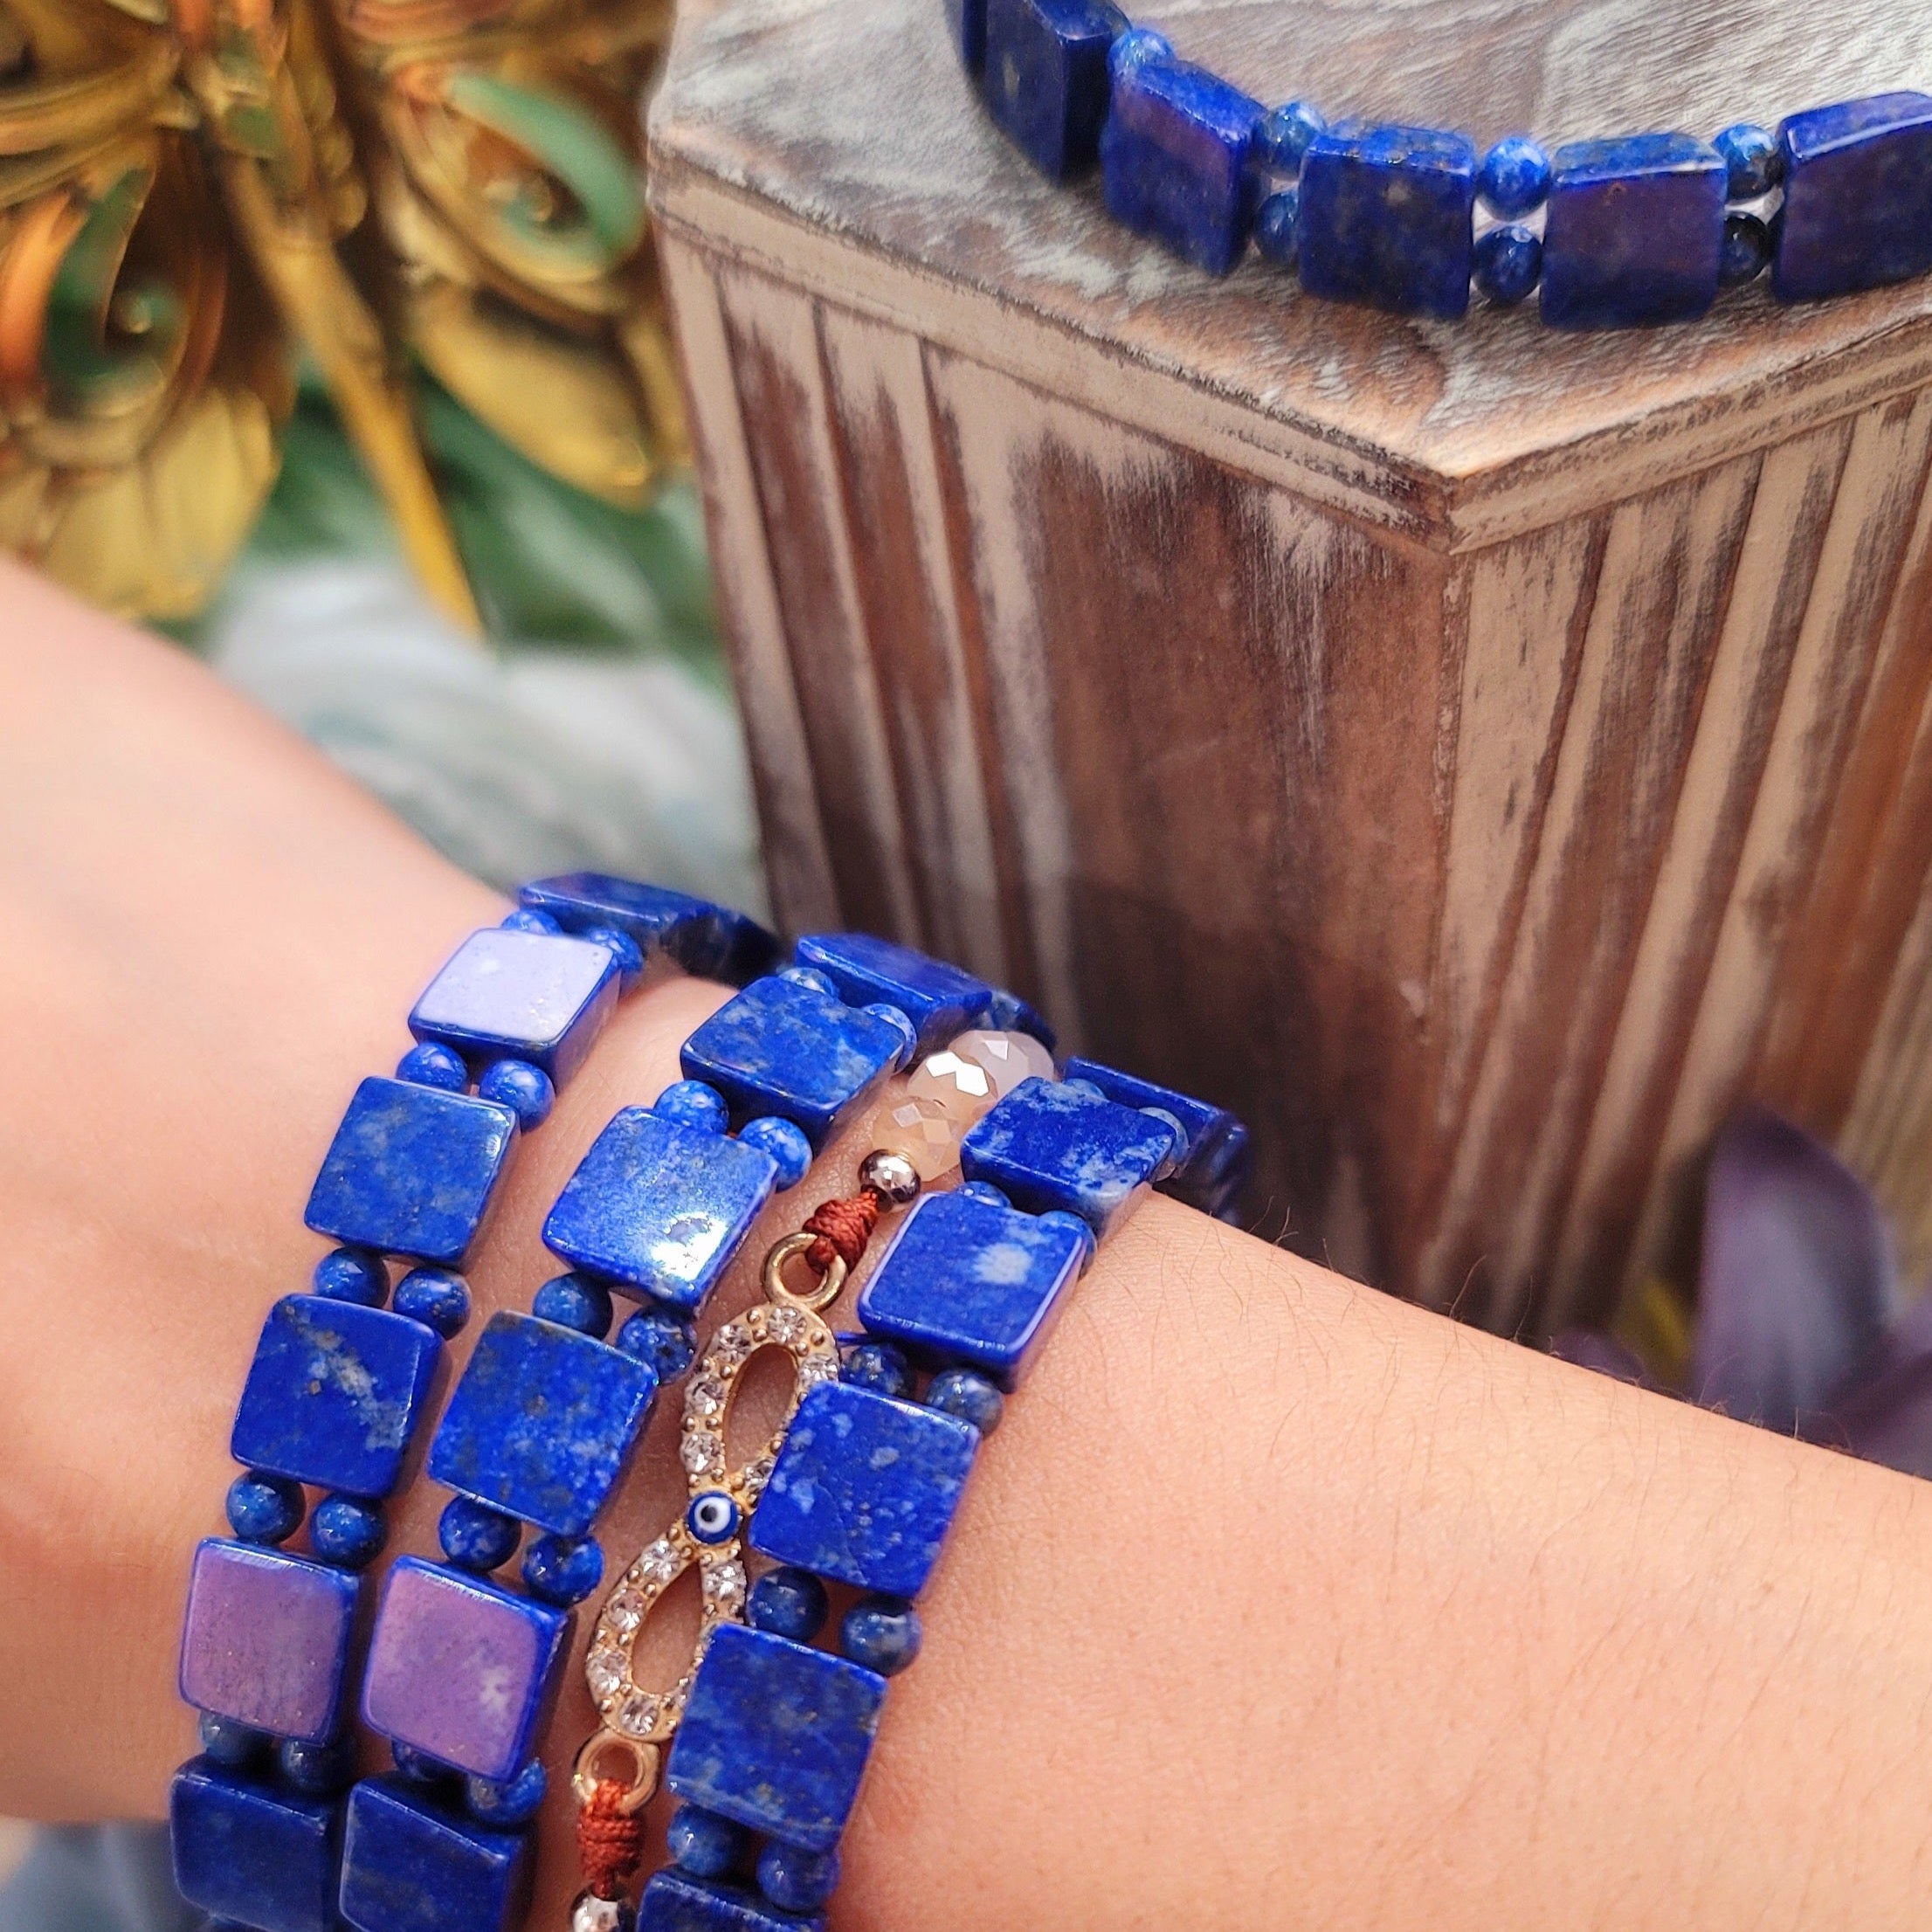 Lapis Lazuli Stretchy Goddess Bangle Bracelet for Confidence, Intuition and Power